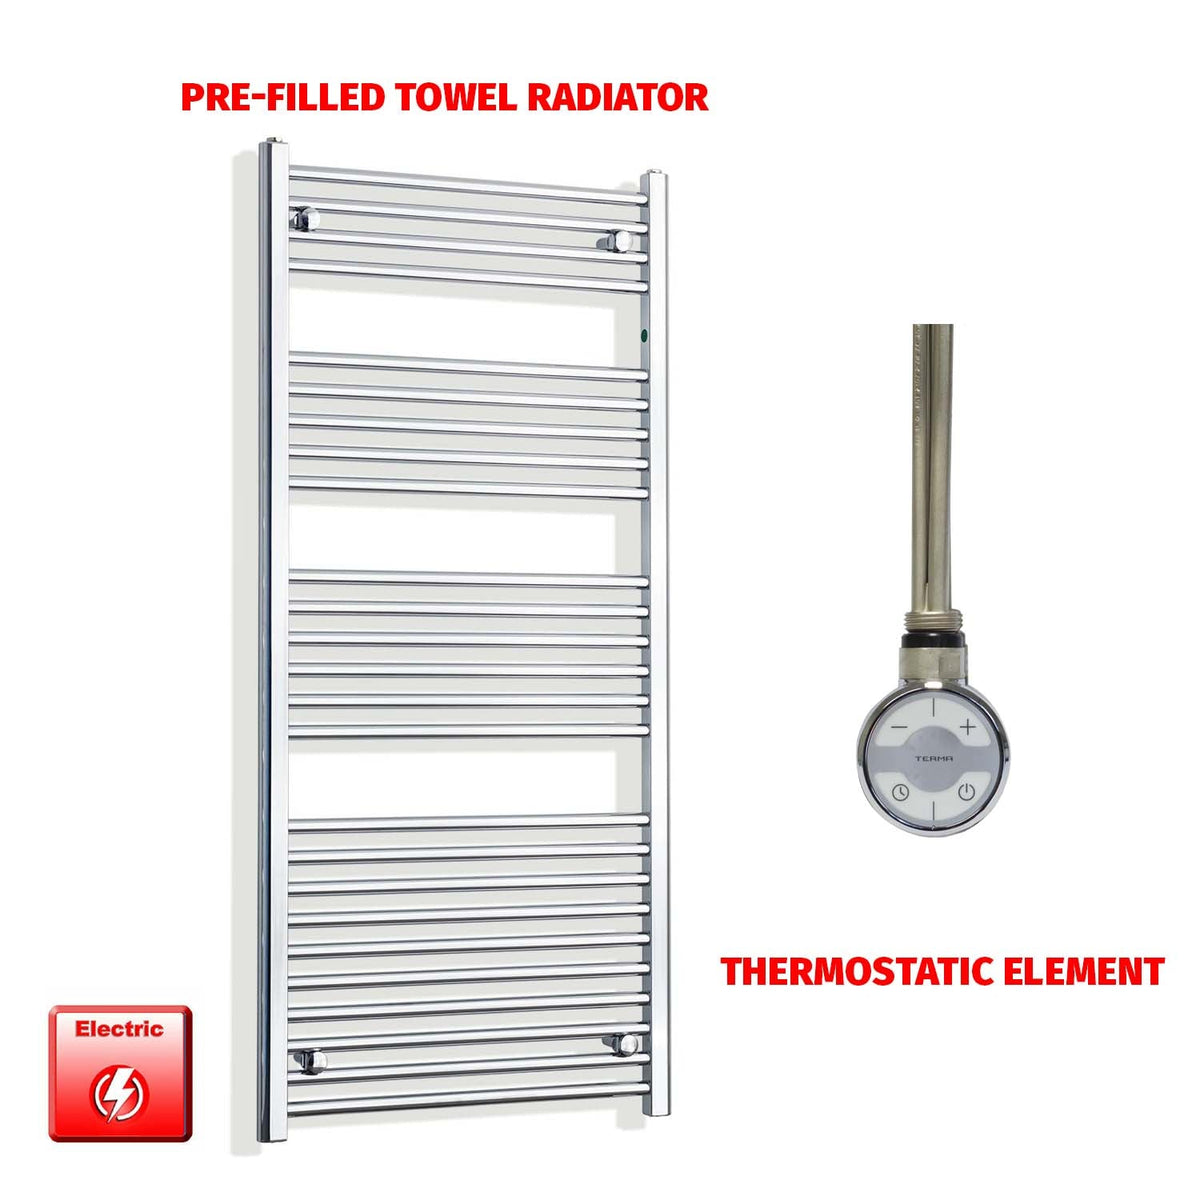 1400mm High 550mm Wide Pre-Filled Electric Heated Towel Radiator Straight Chrome MOA Thermostatic element no timer